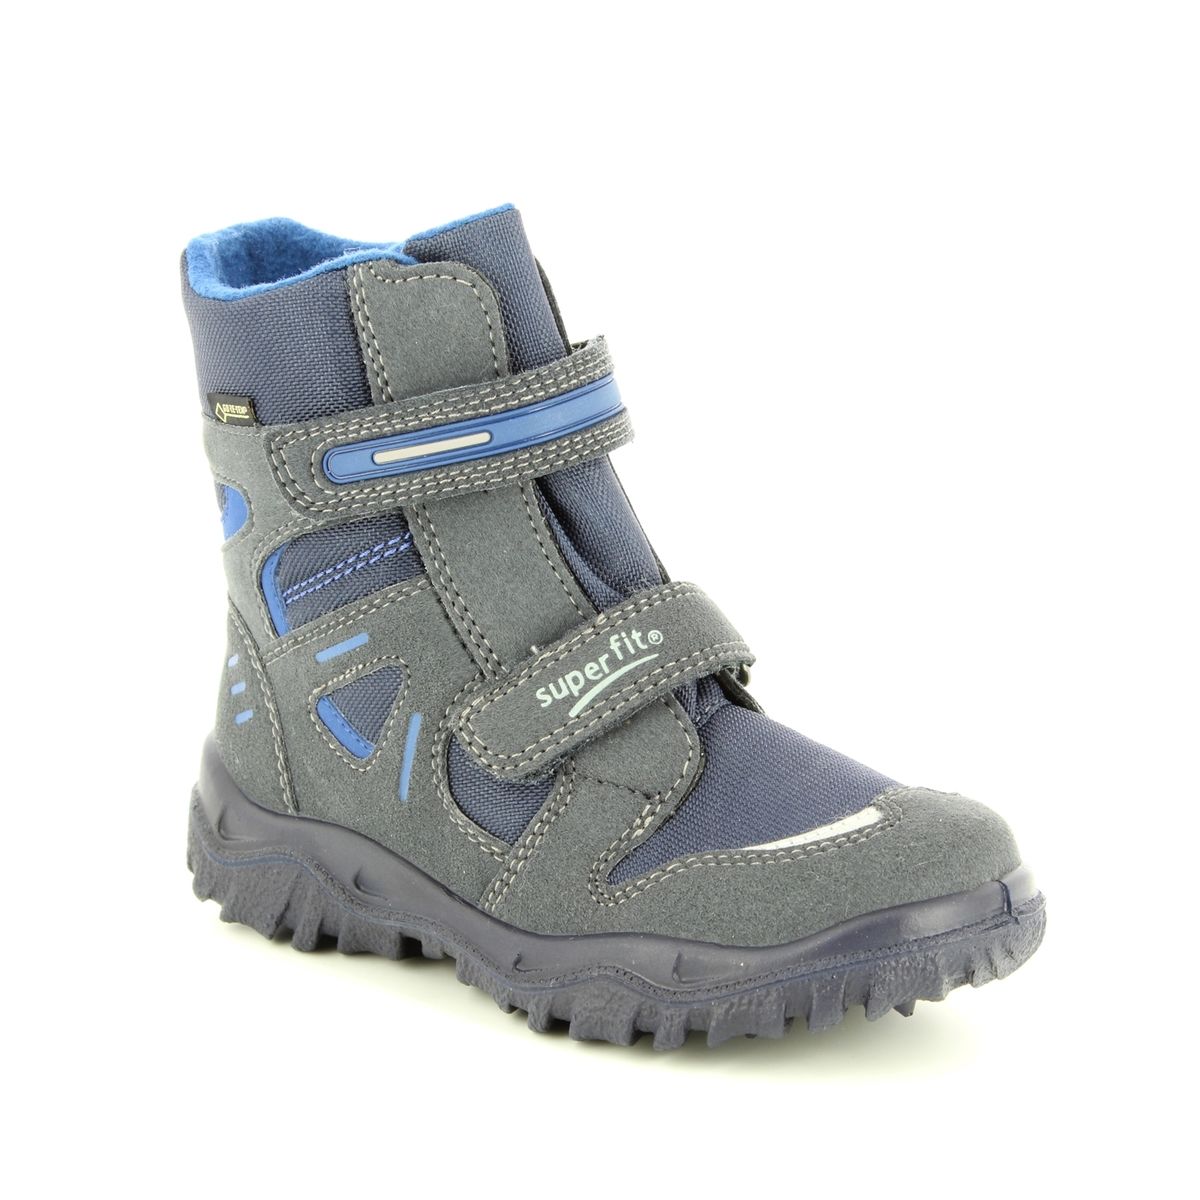 Superfit Husky Jnr Gore Navy Kids Boys Boots 09080-80 In Size 38 In Plain Navy For kids